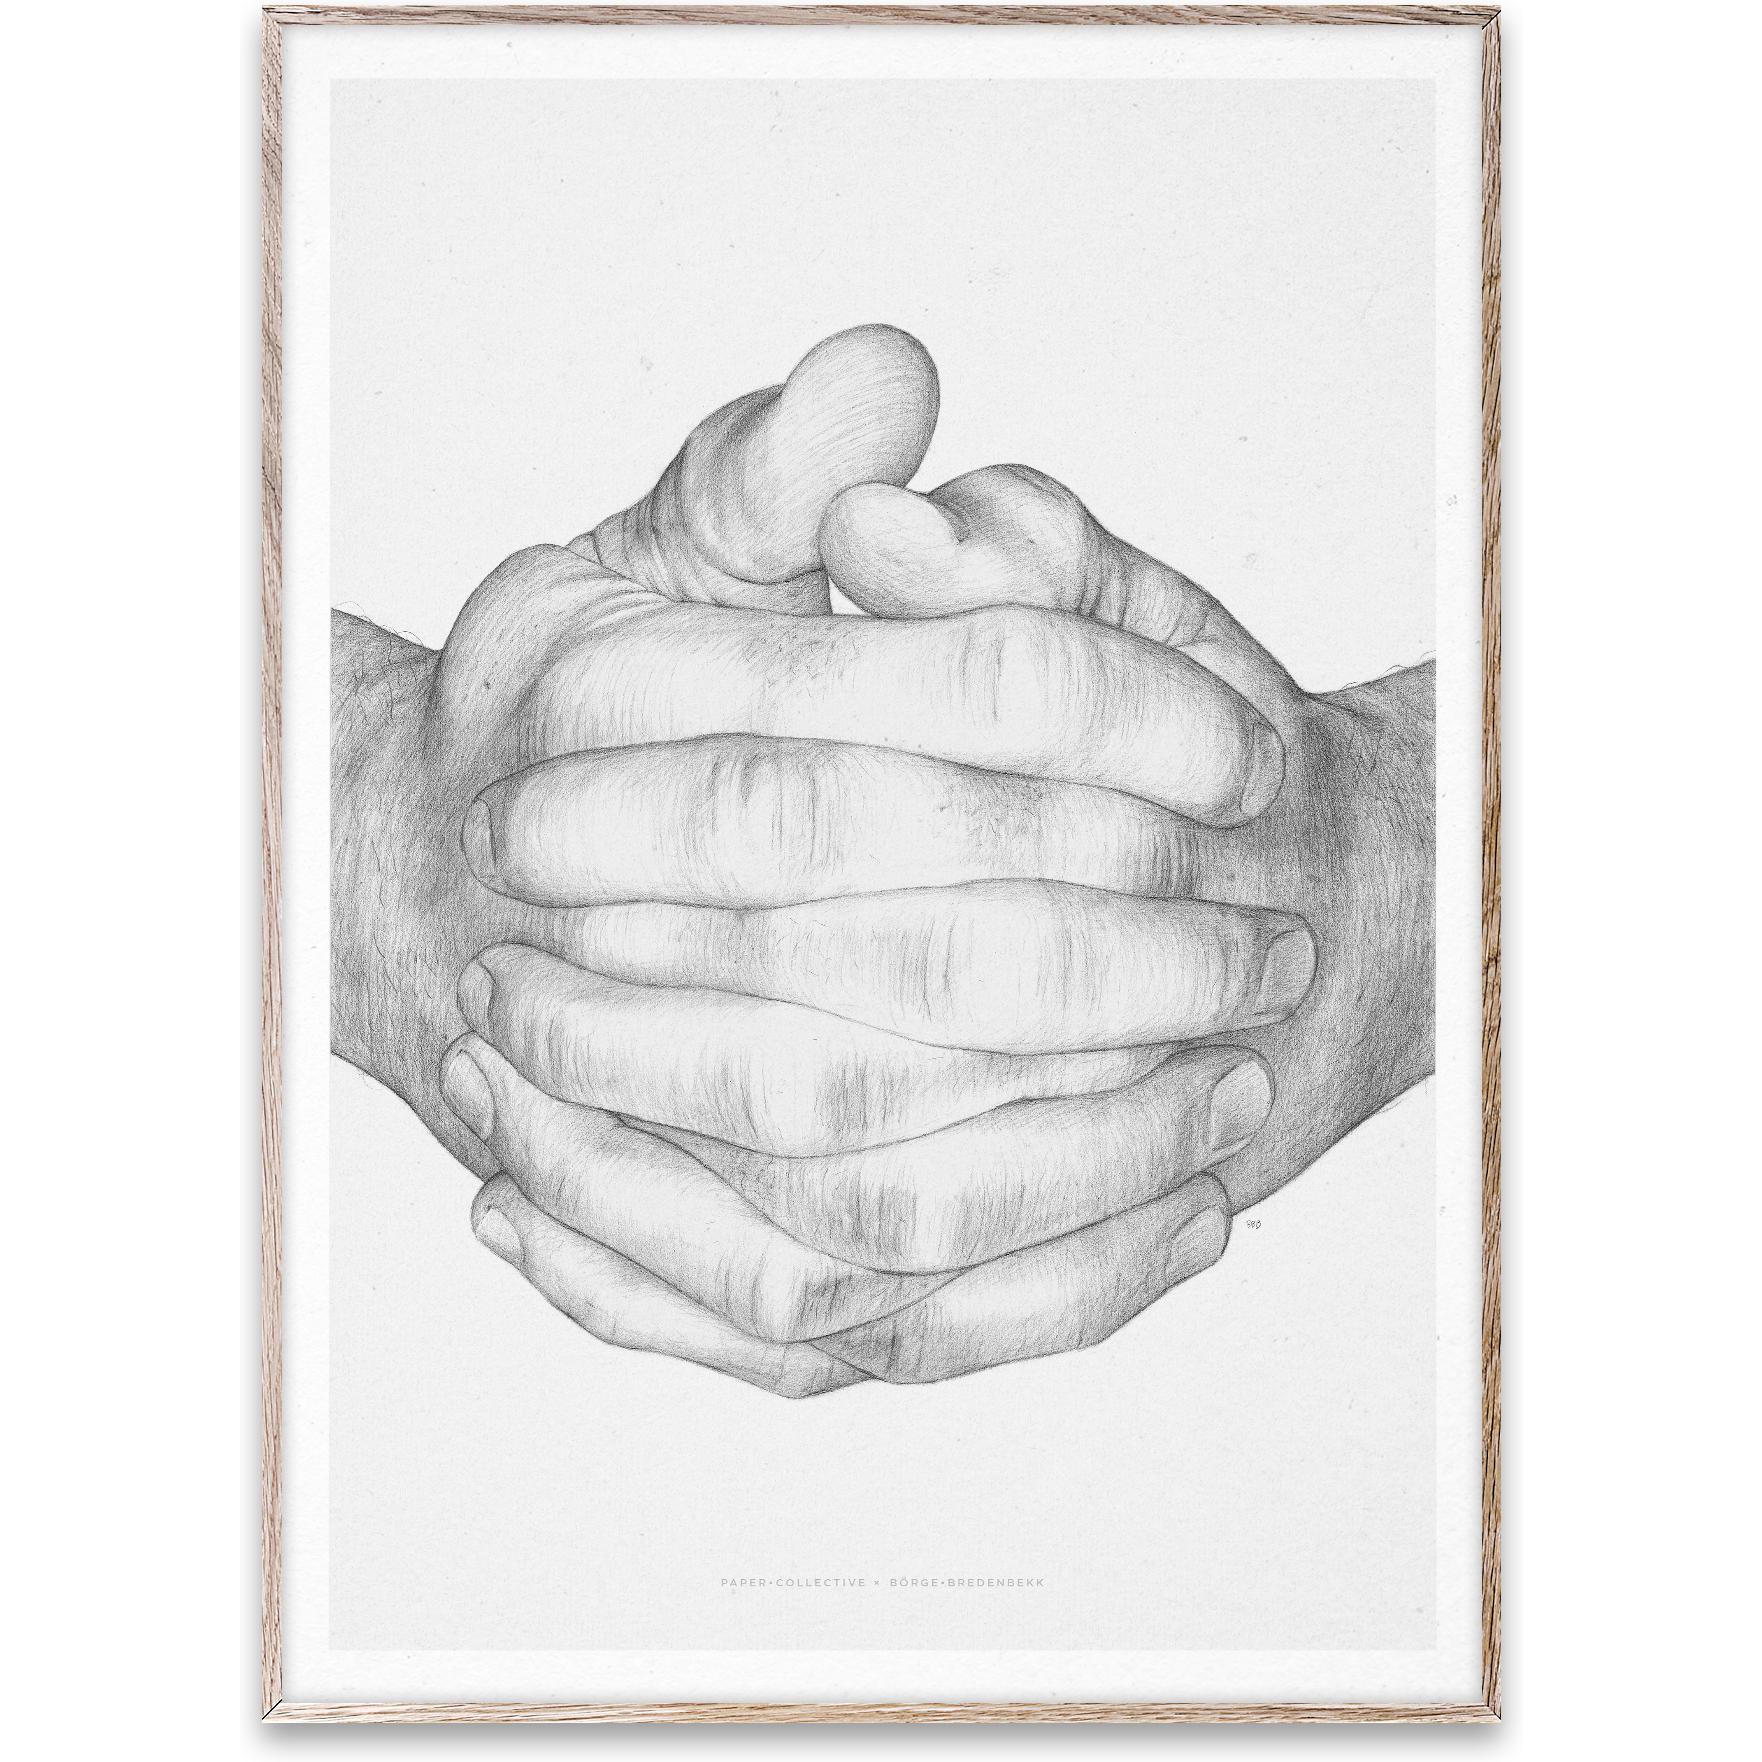 Paper Collective Folded Hands Poster, 30x40 Cm